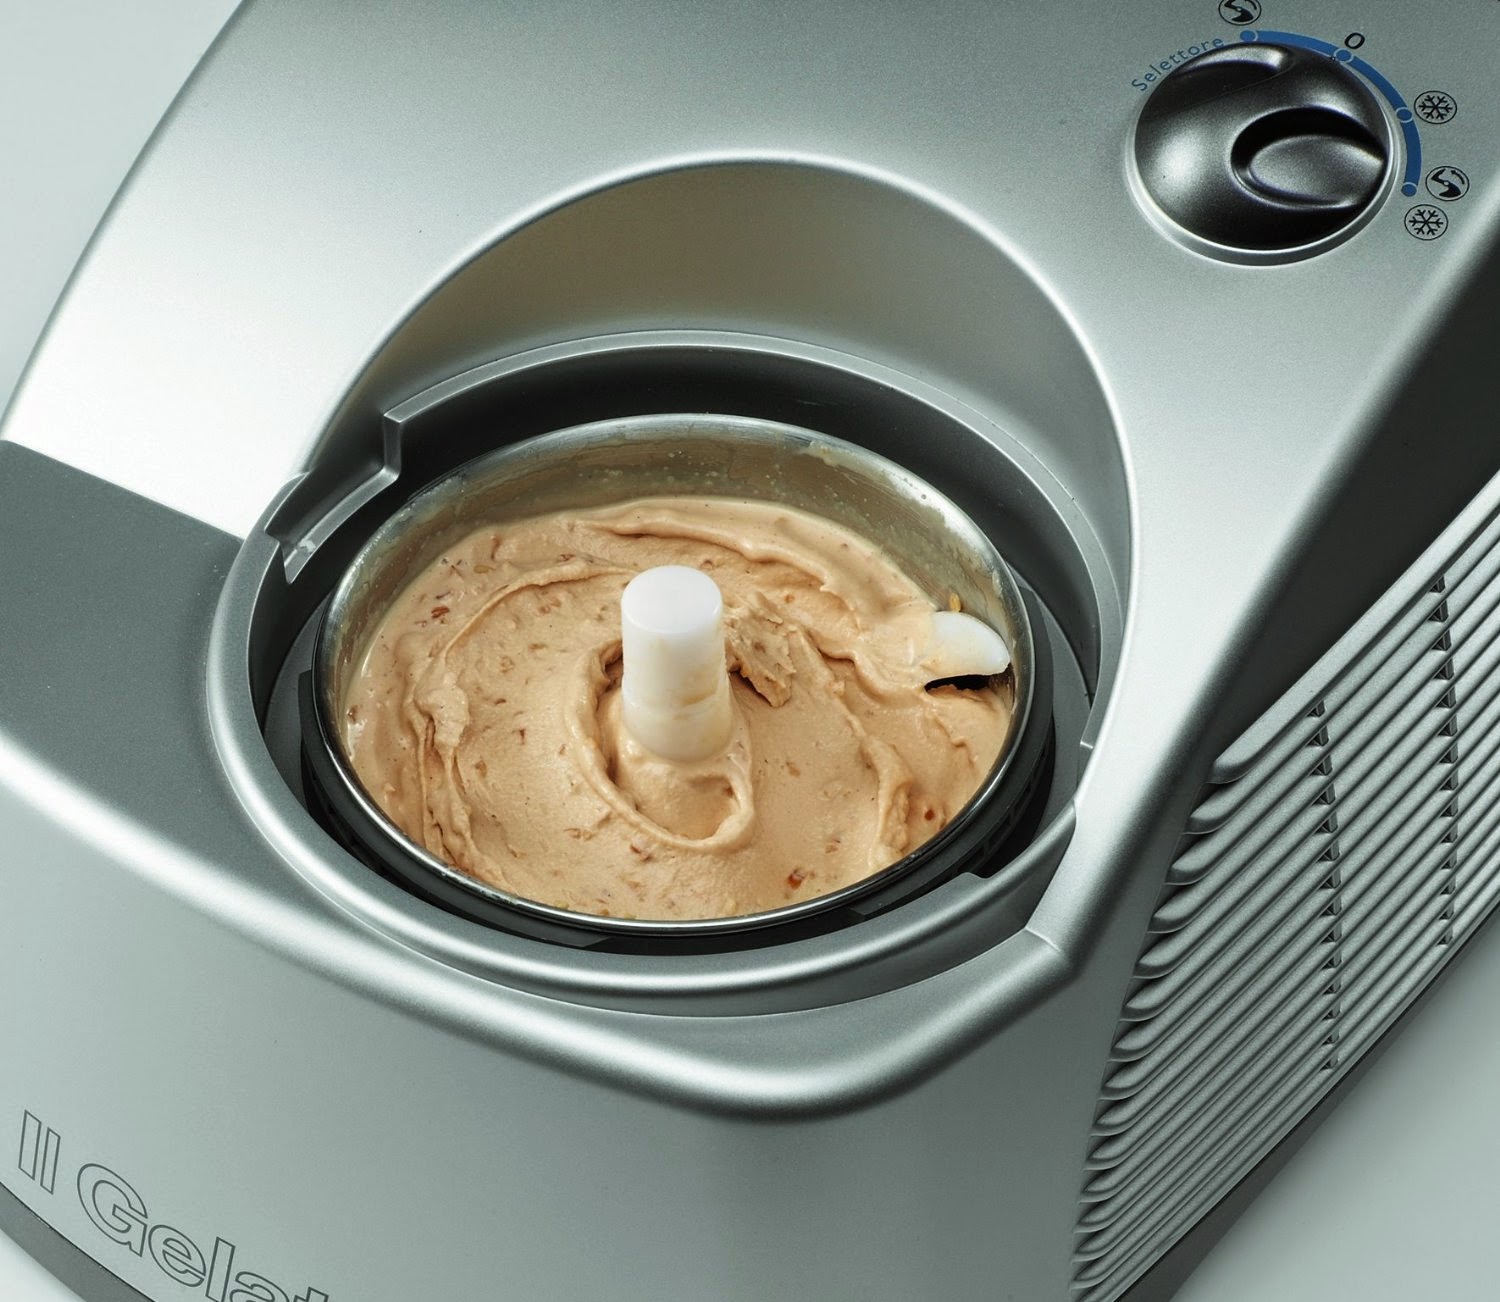 DeLonghi GM6000 Gelato Maker with Self-Refrigerating Compressor, picture, image, review features and specifications